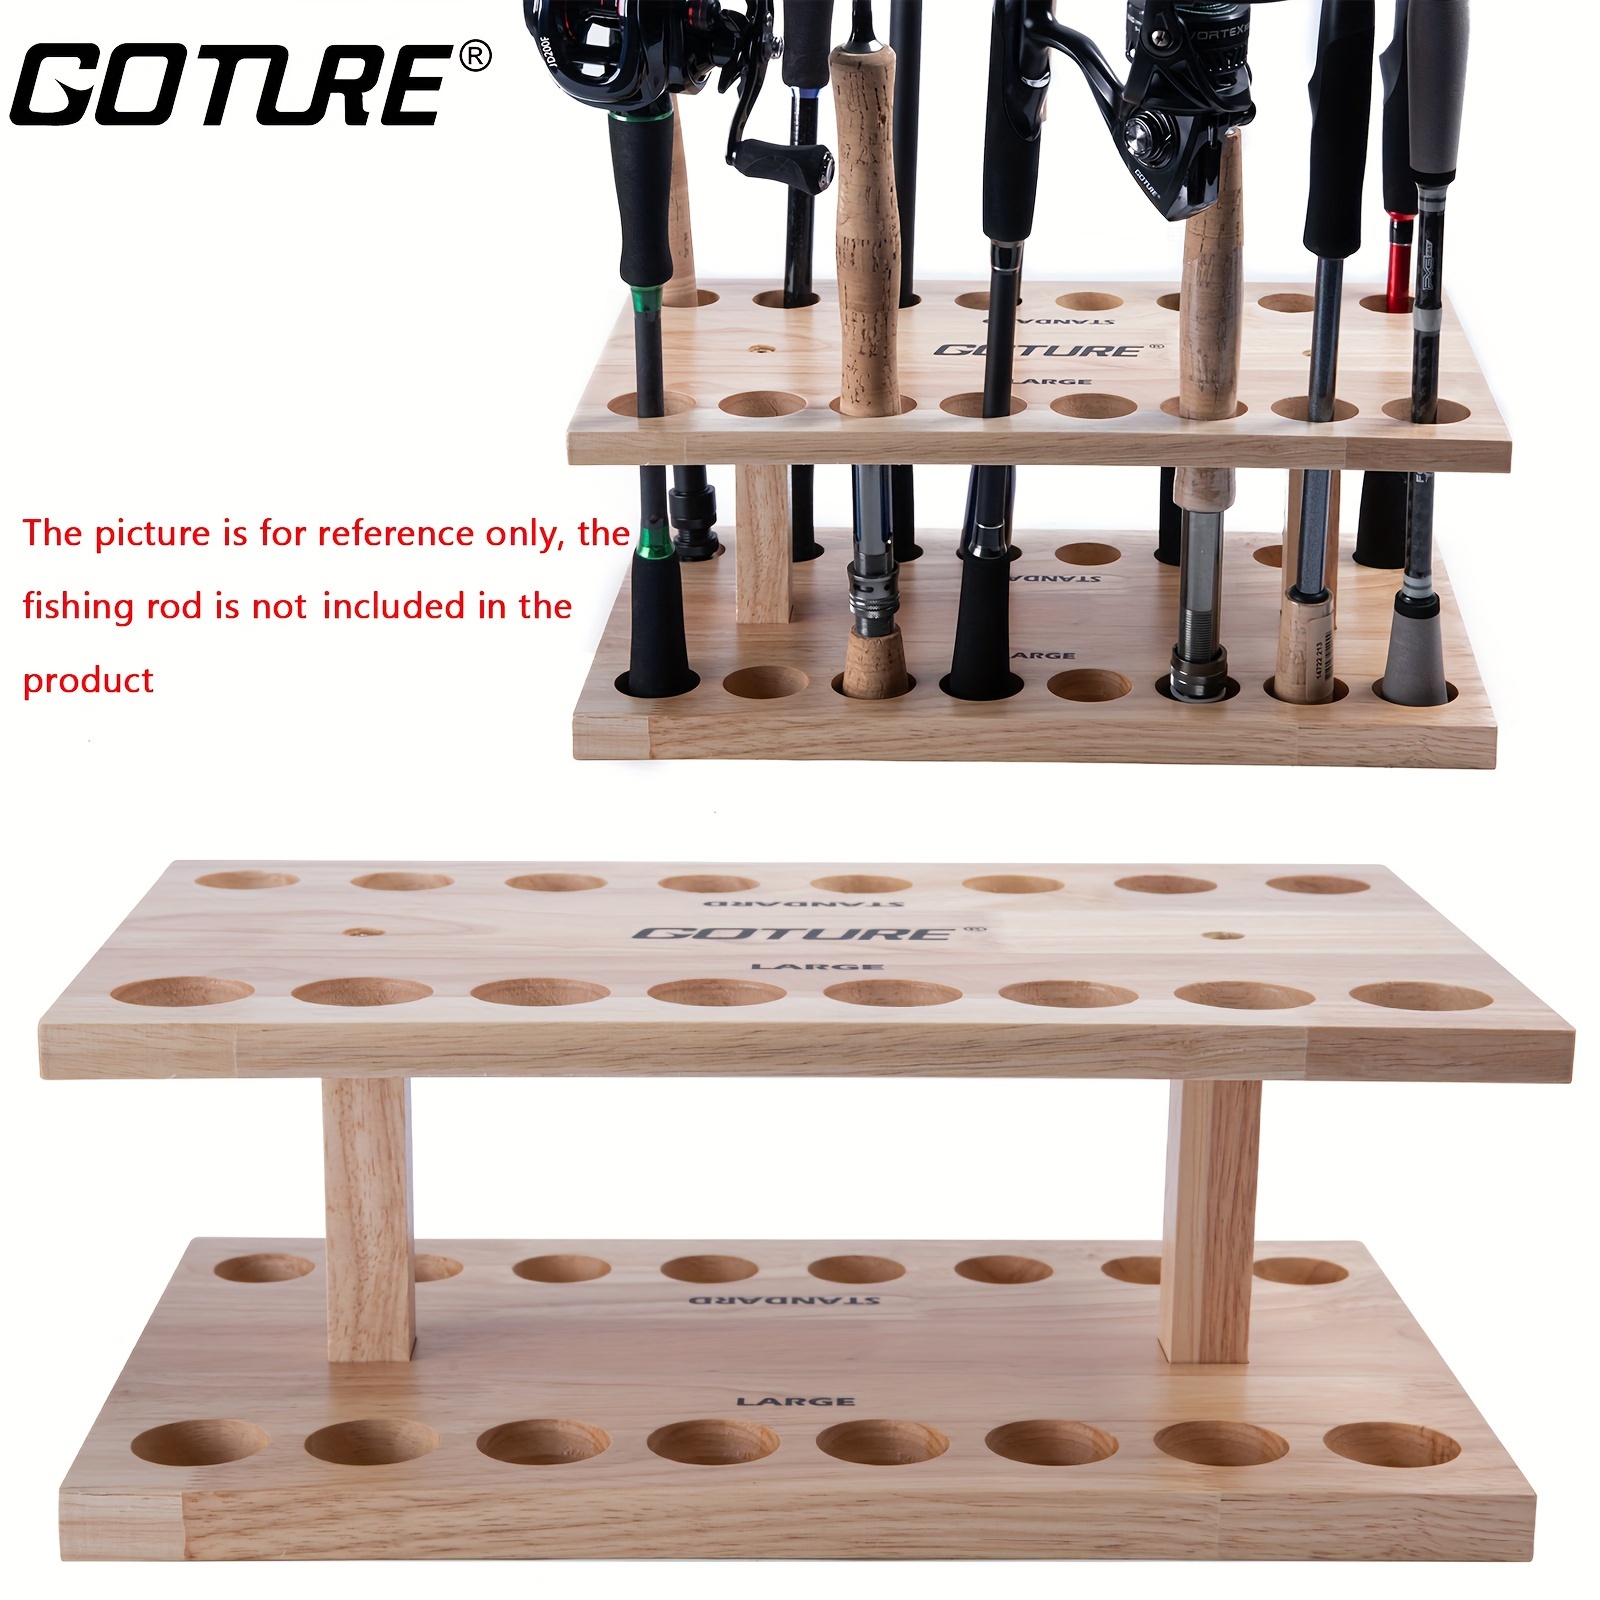 

Goture 16 Slots Square Fishing Rod Holder, Adjustable Fishing Pole Vertical Rack, Fishing Gear Gifts